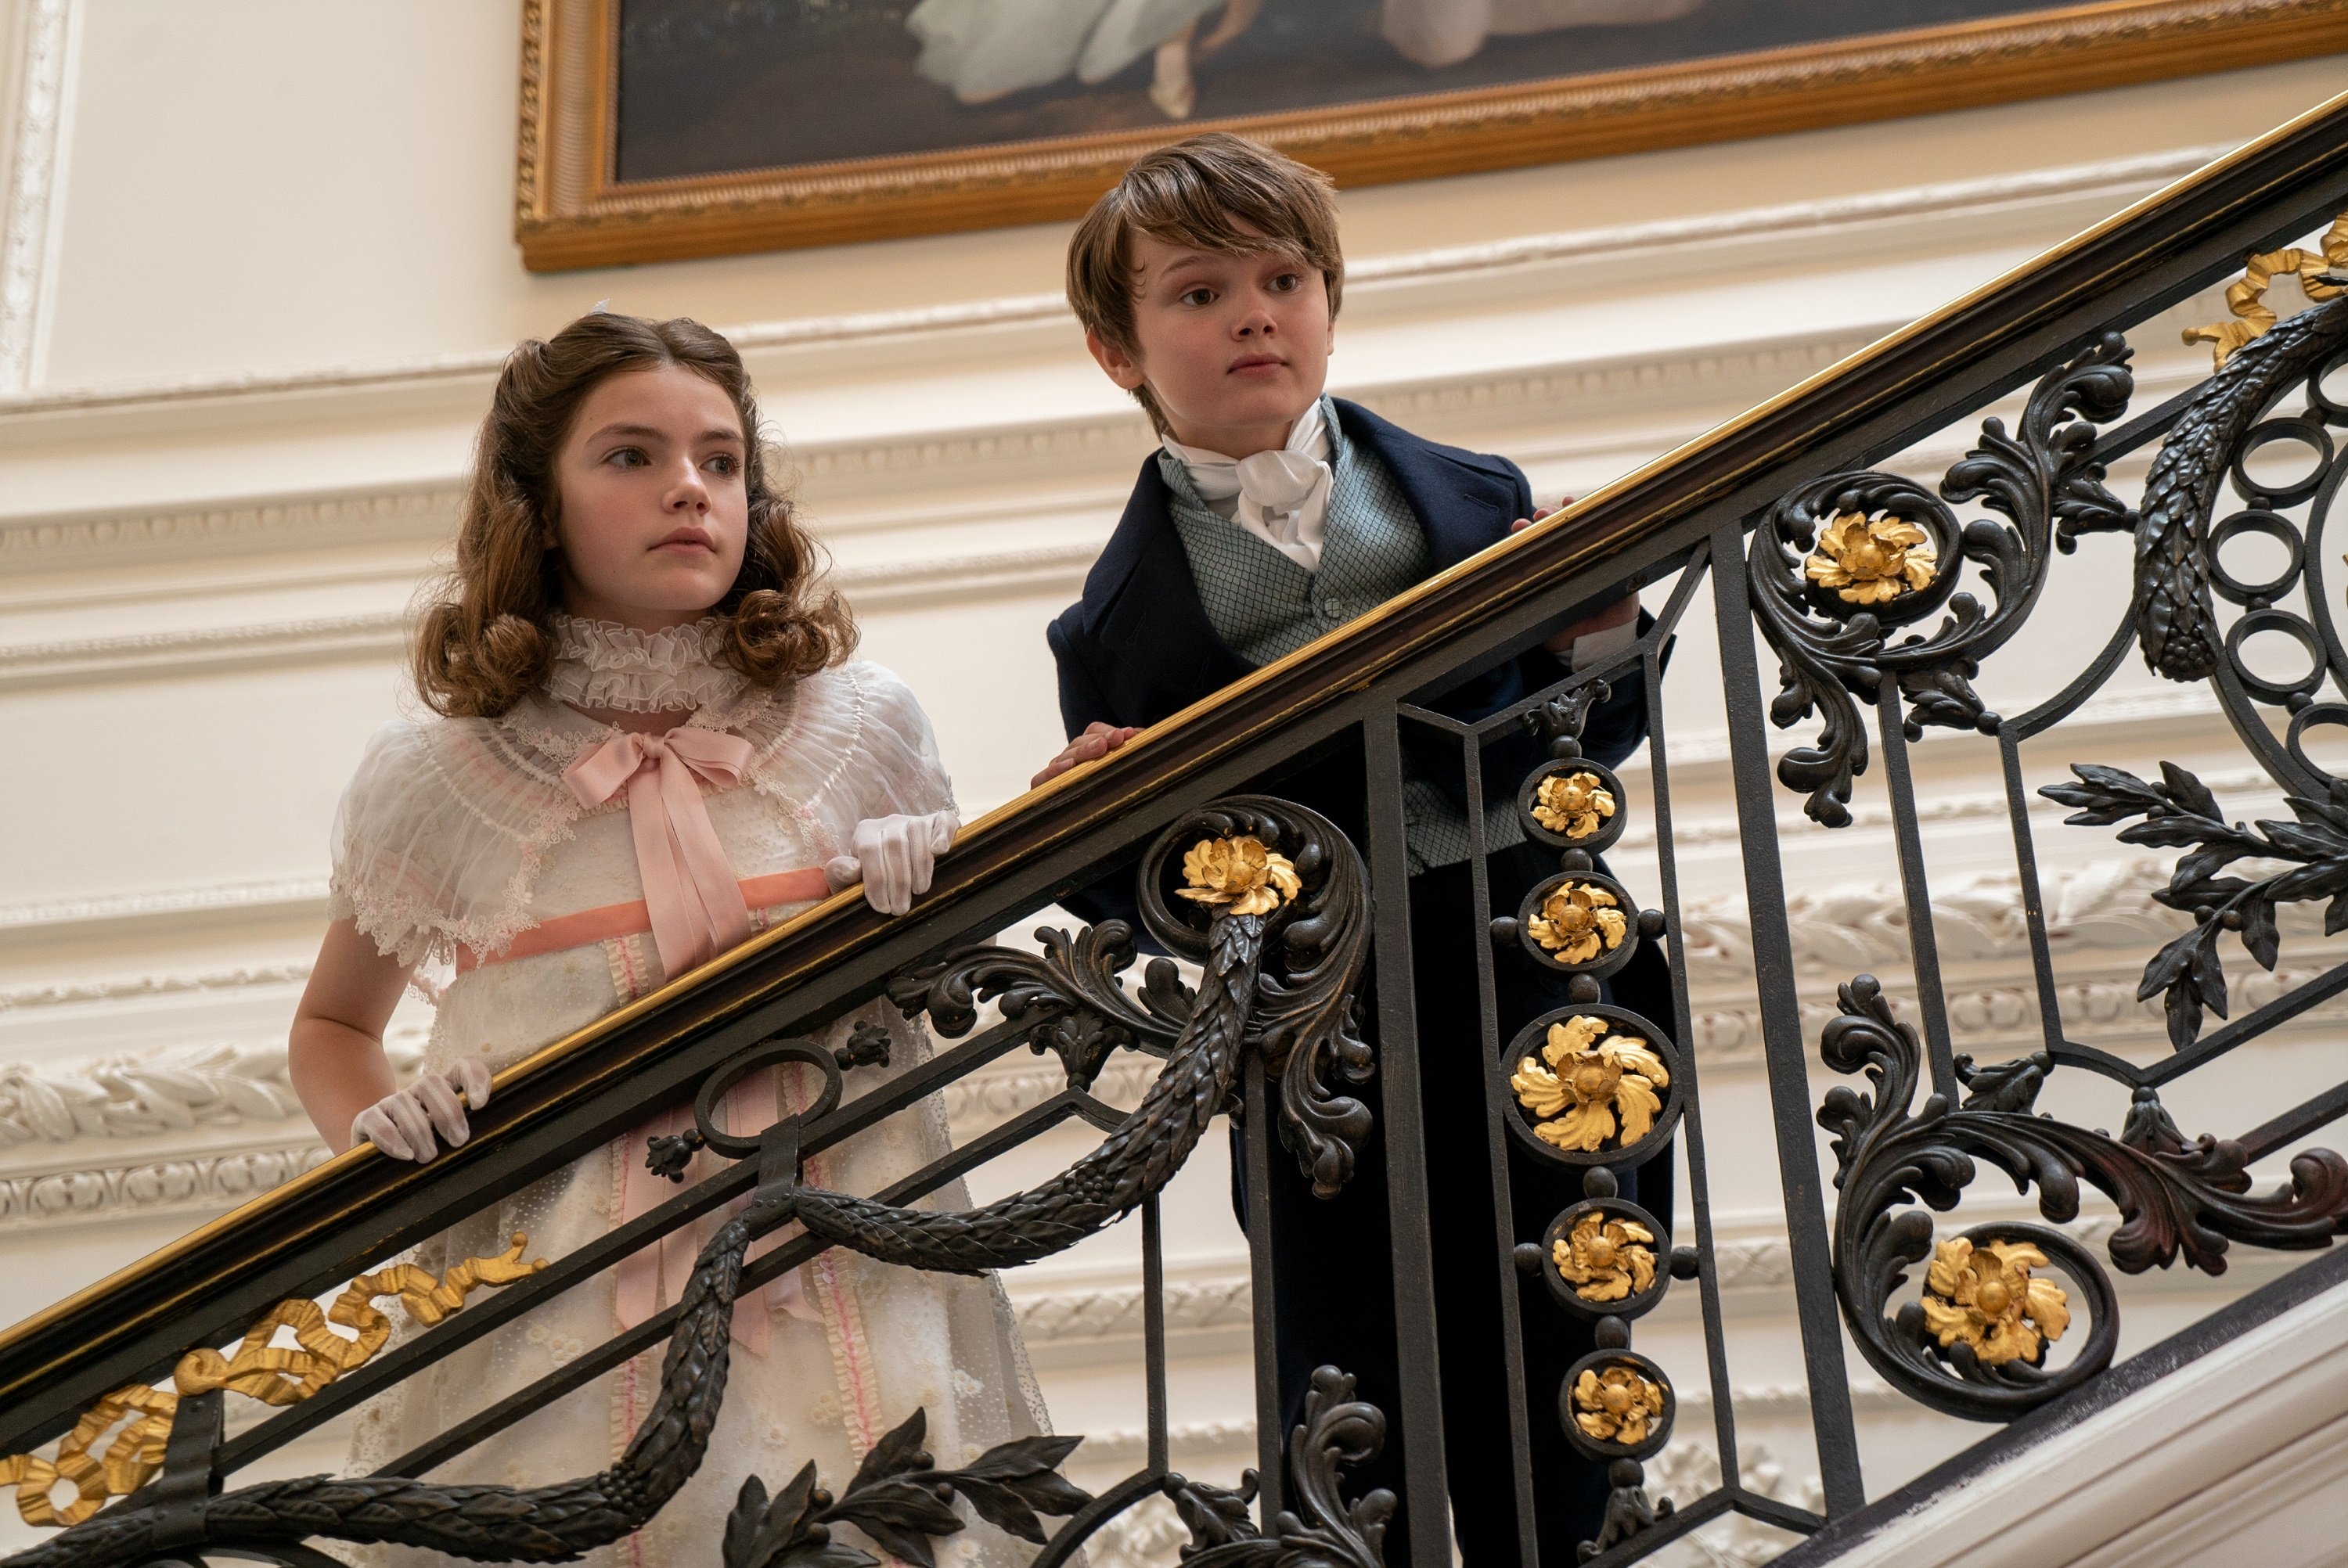 'Bridgerton' siblings Hyacinth and Gregory looking out over a banister on the stairs